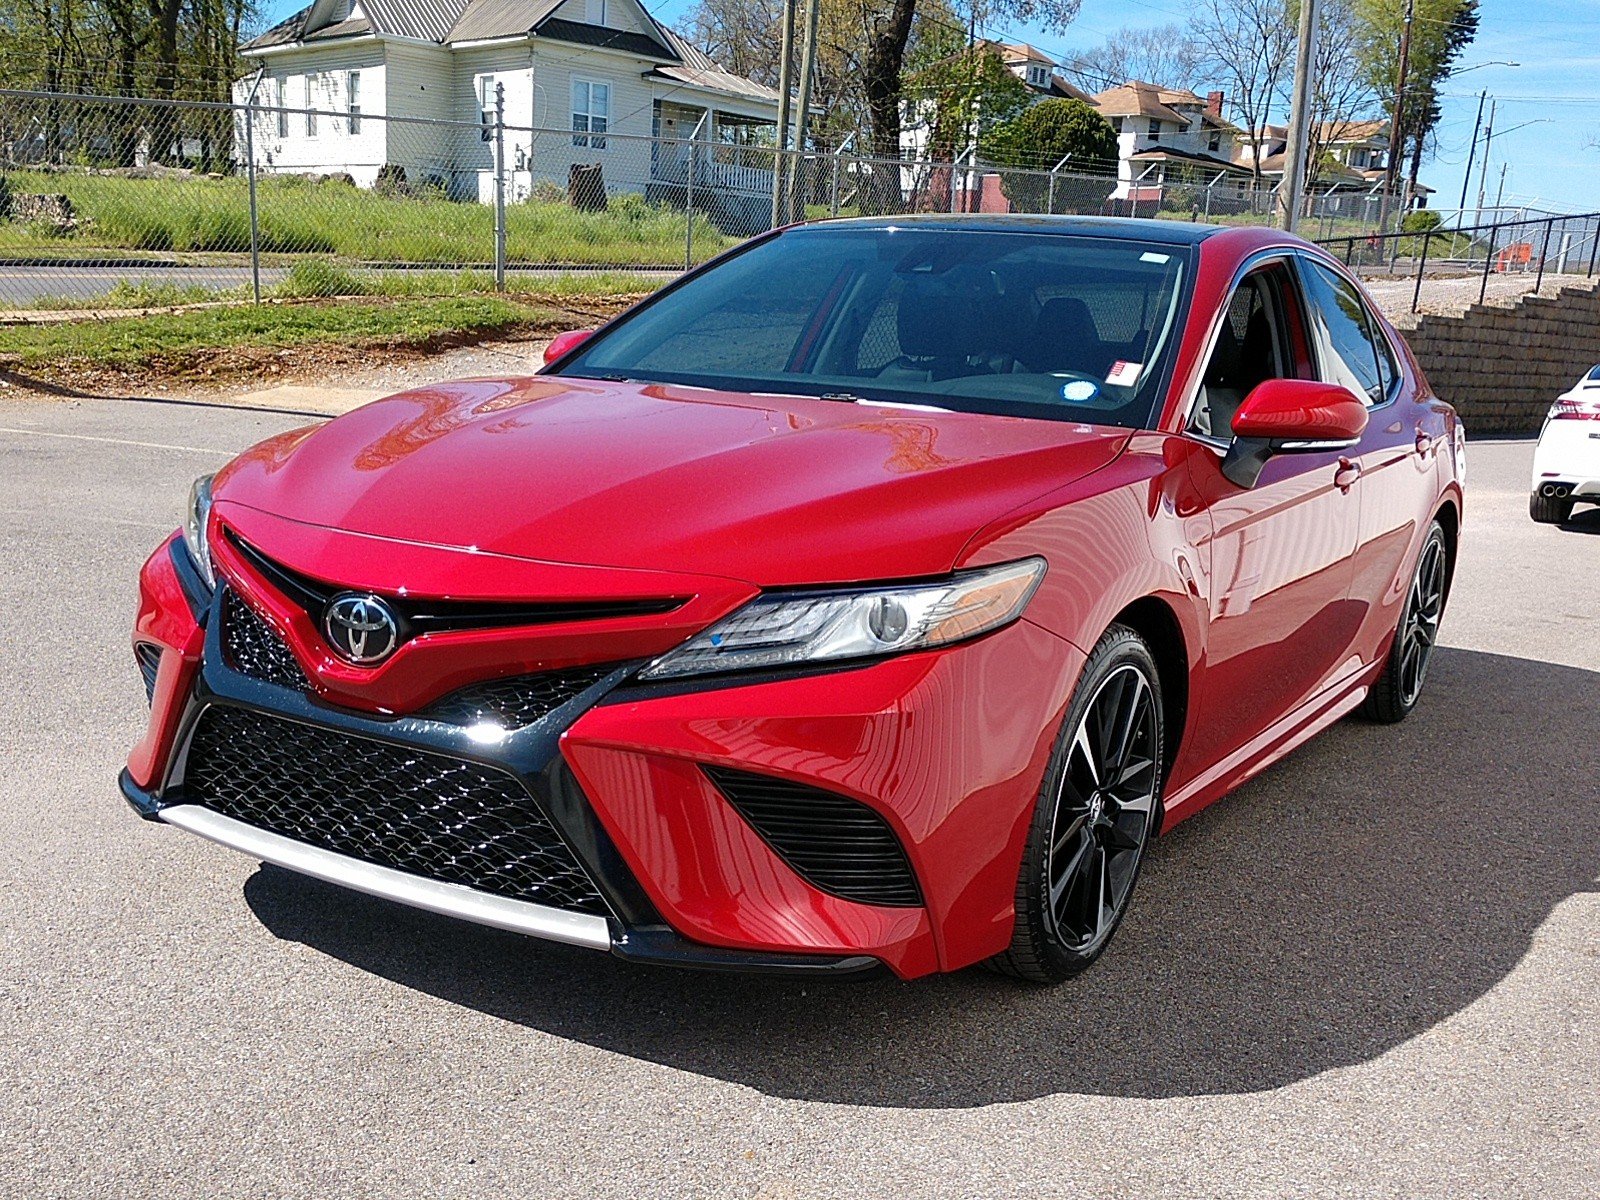 PreOwned 2019 Toyota Camry XSE 4dr Car in Birmingham